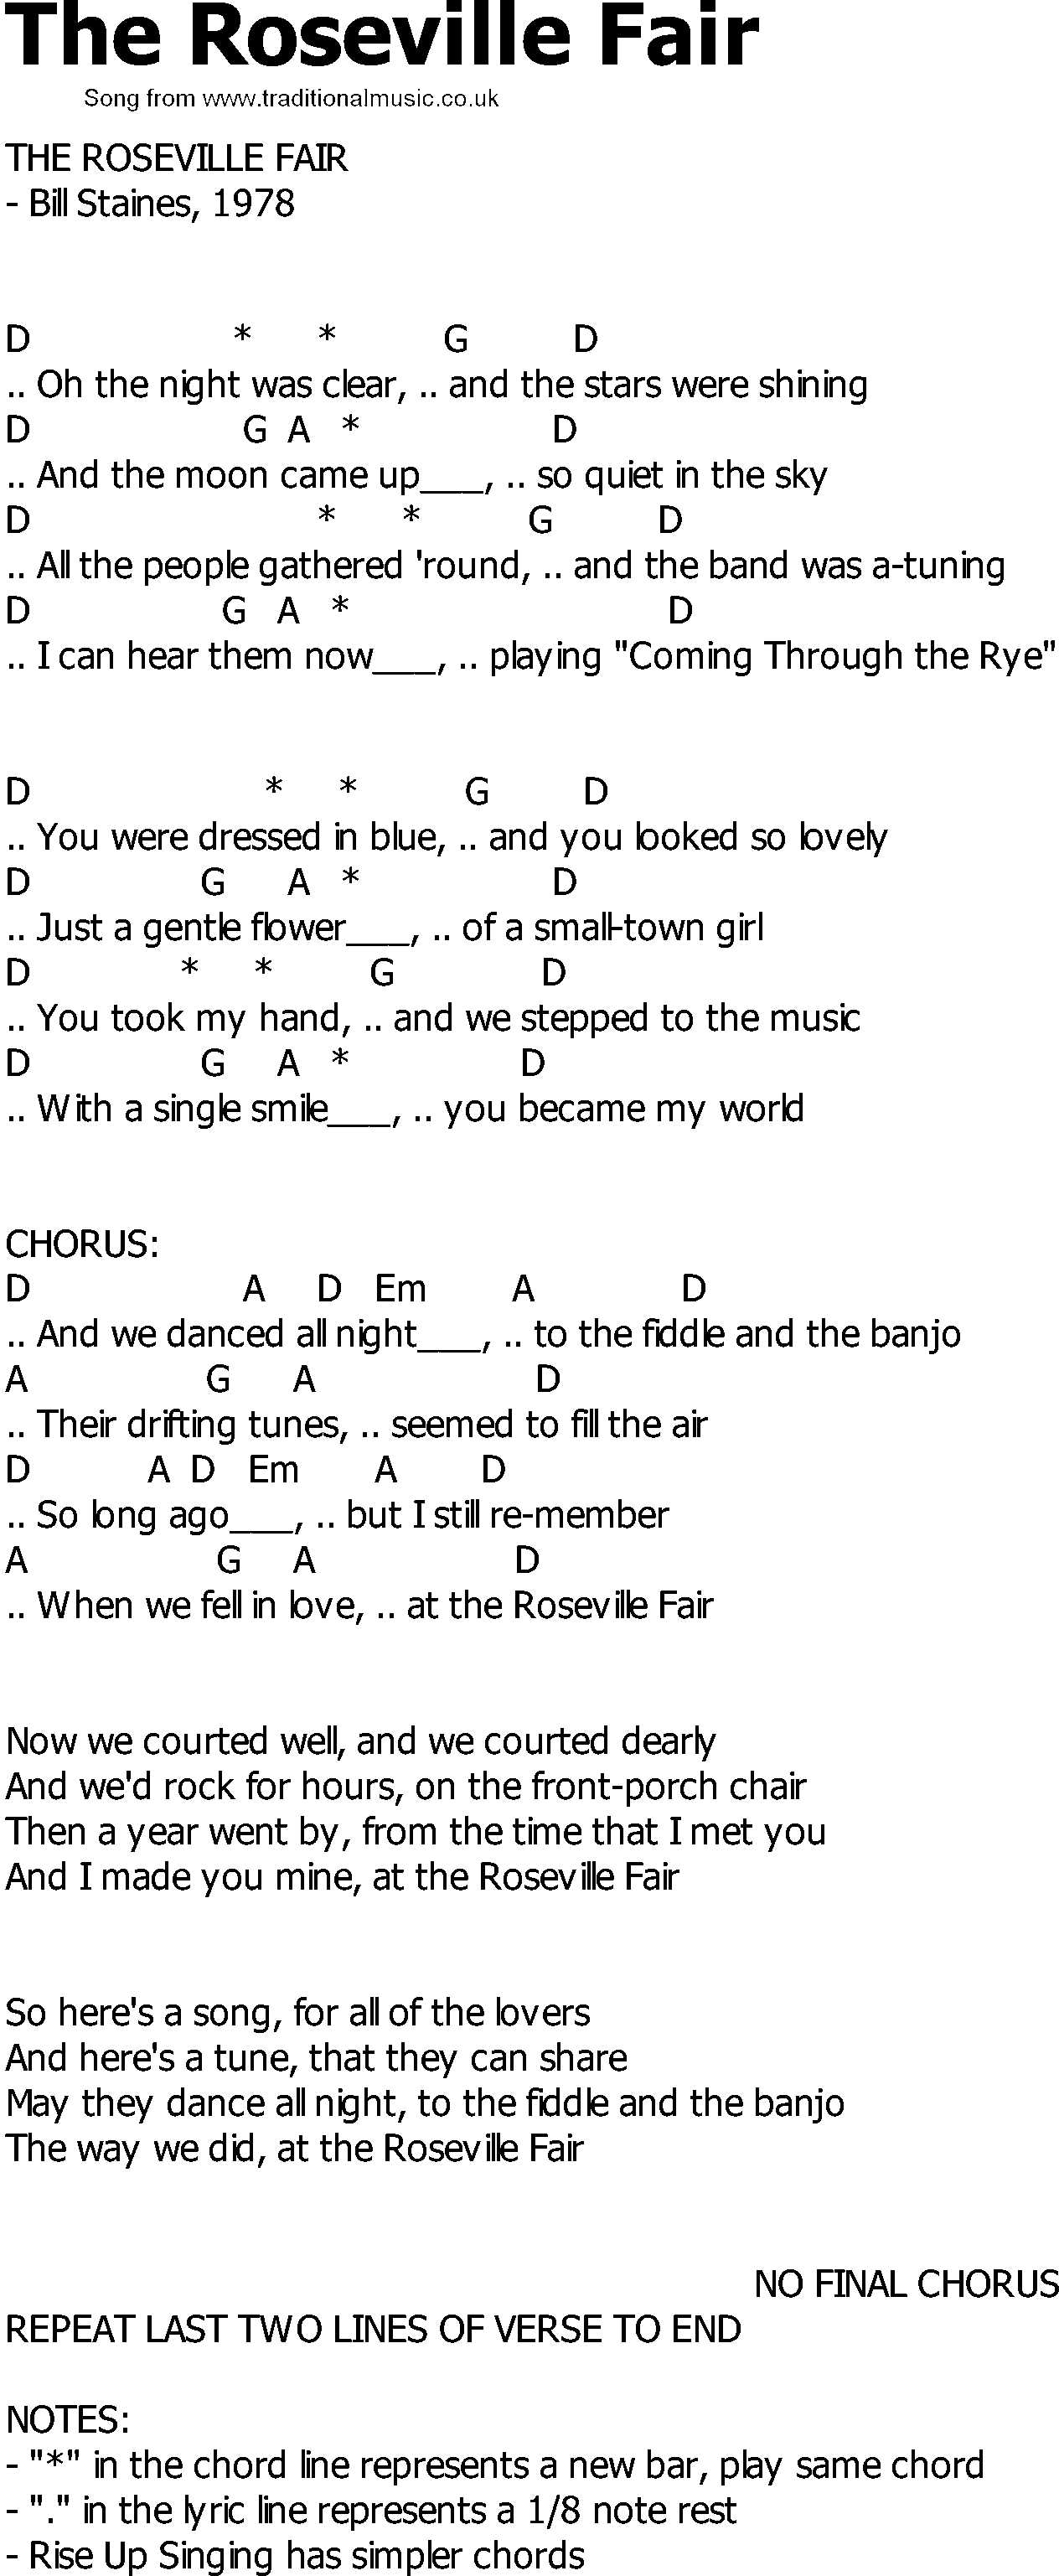 Old Country song lyrics with chords - The Roseville Fair